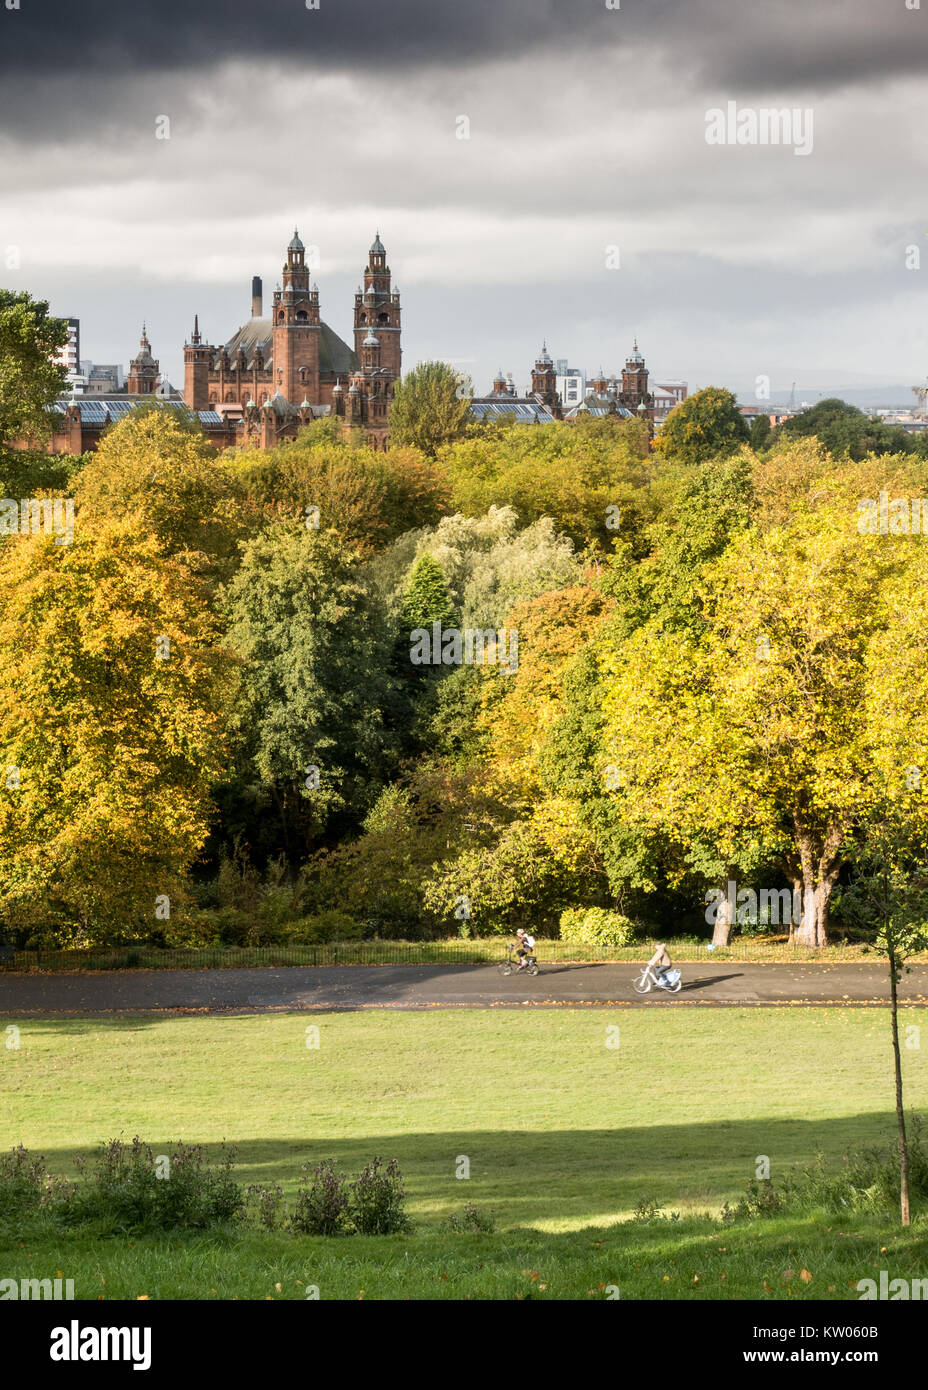 Glasgow, Scotland, UK - September 30, 2017: Cyclists ride through Kelvingrove Park in the west end of Glasgow on a sunny autumn day, with autumn trees Stock Photo